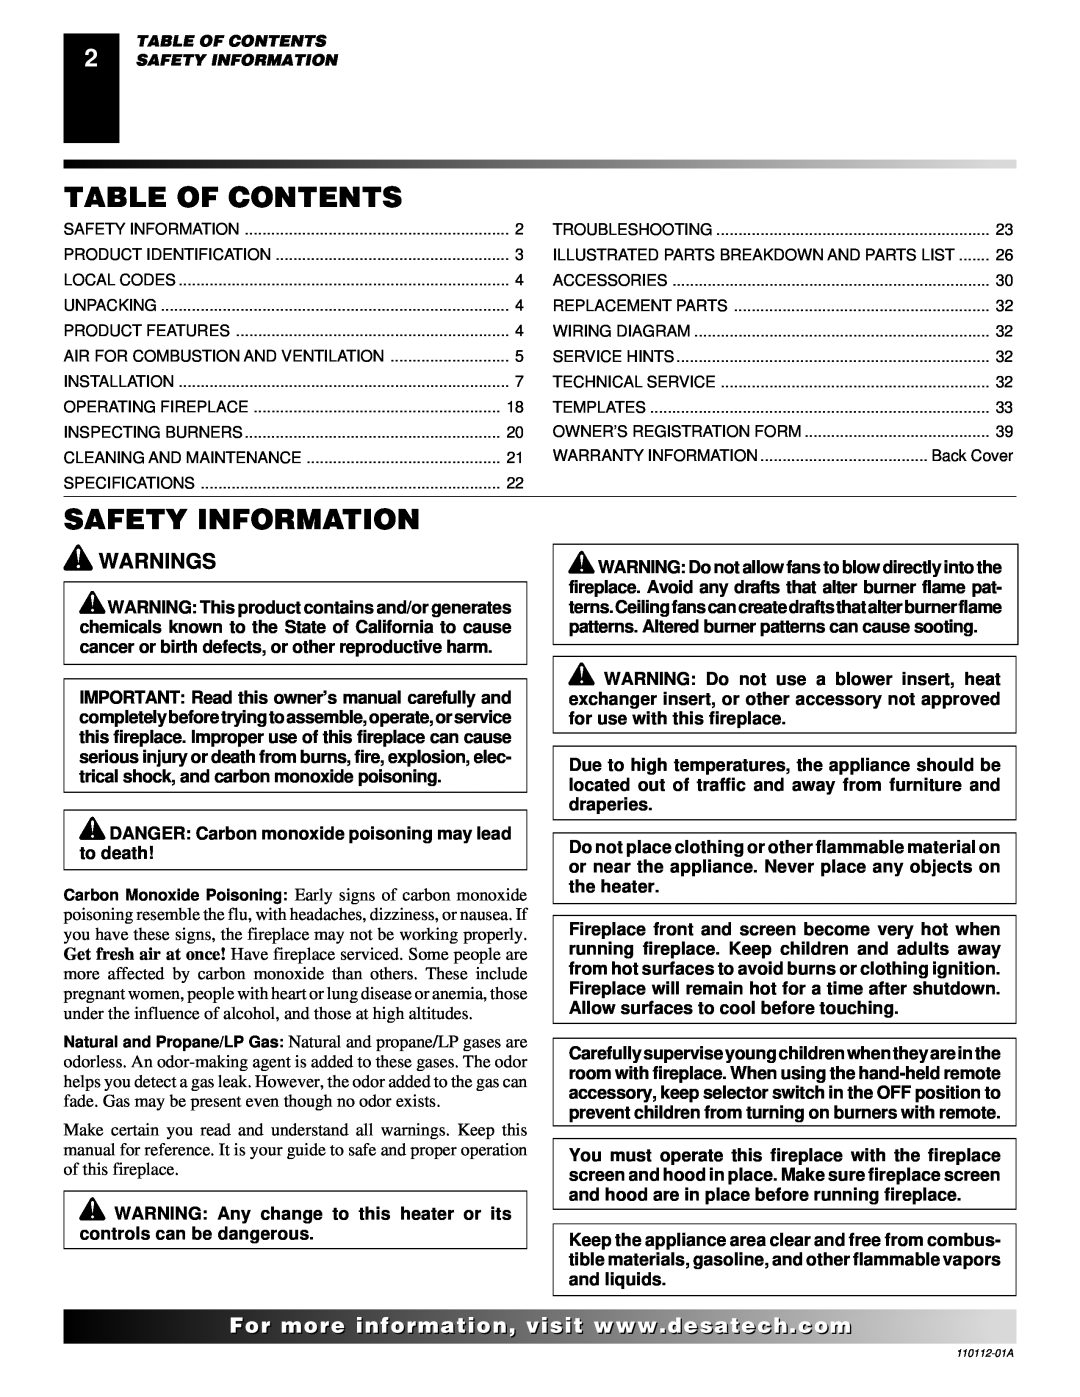 Desa VTGF33NRA installation manual Table Of Contents, Safety Information, Warnings, For..com 